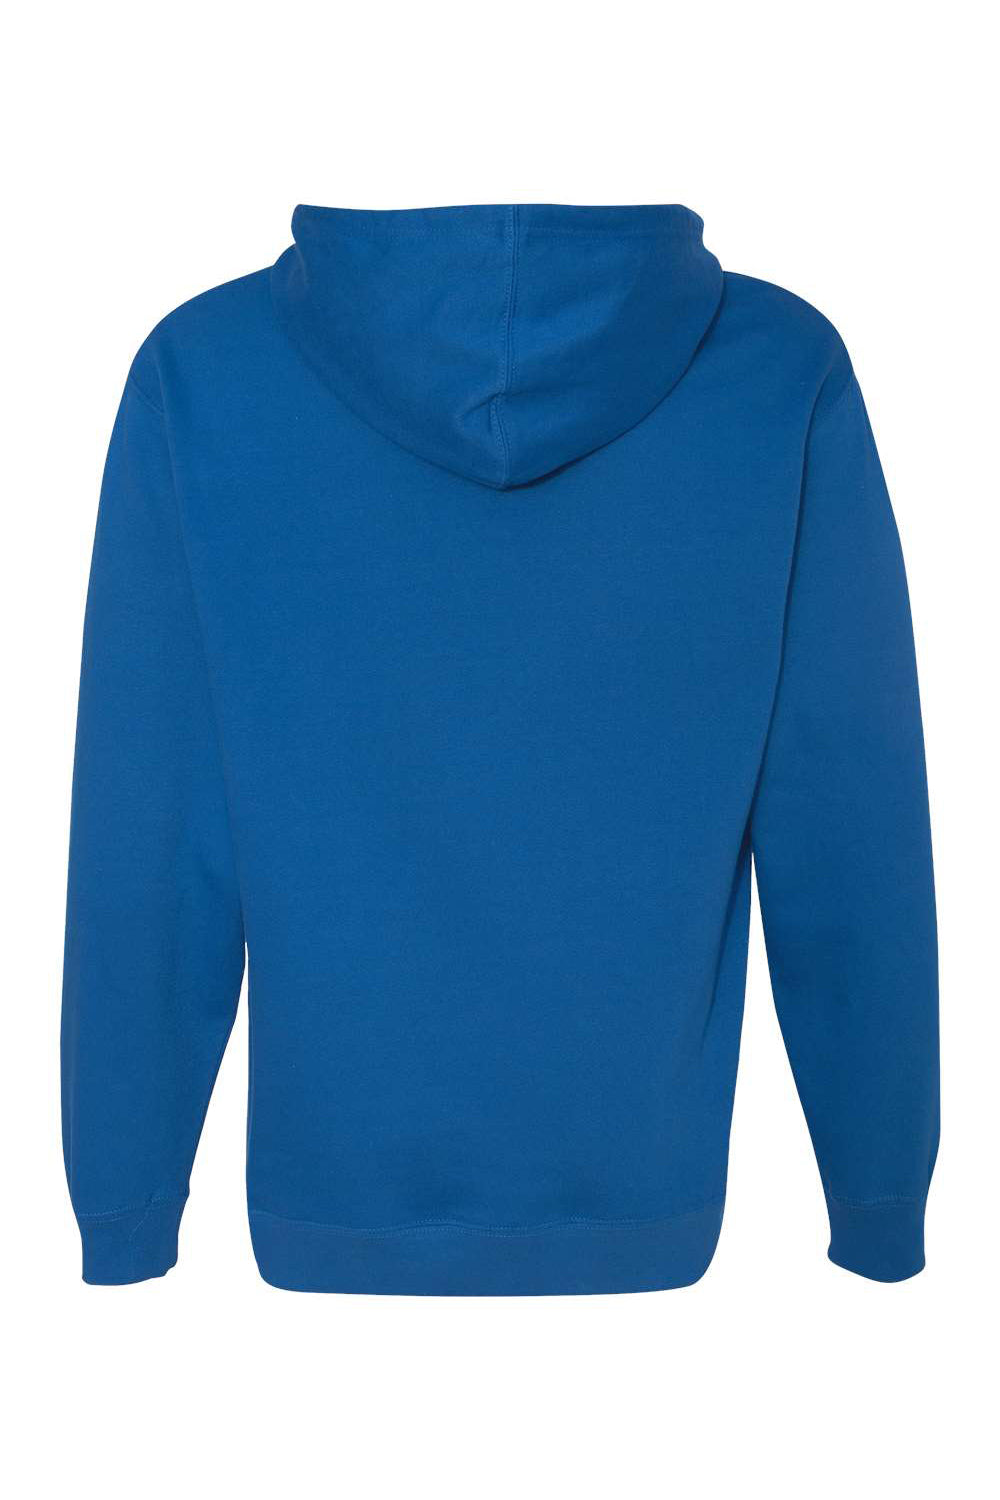 Independent Trading Co. SS4500 Mens Hooded Sweatshirt Hoodie Royal Blue Flat Back